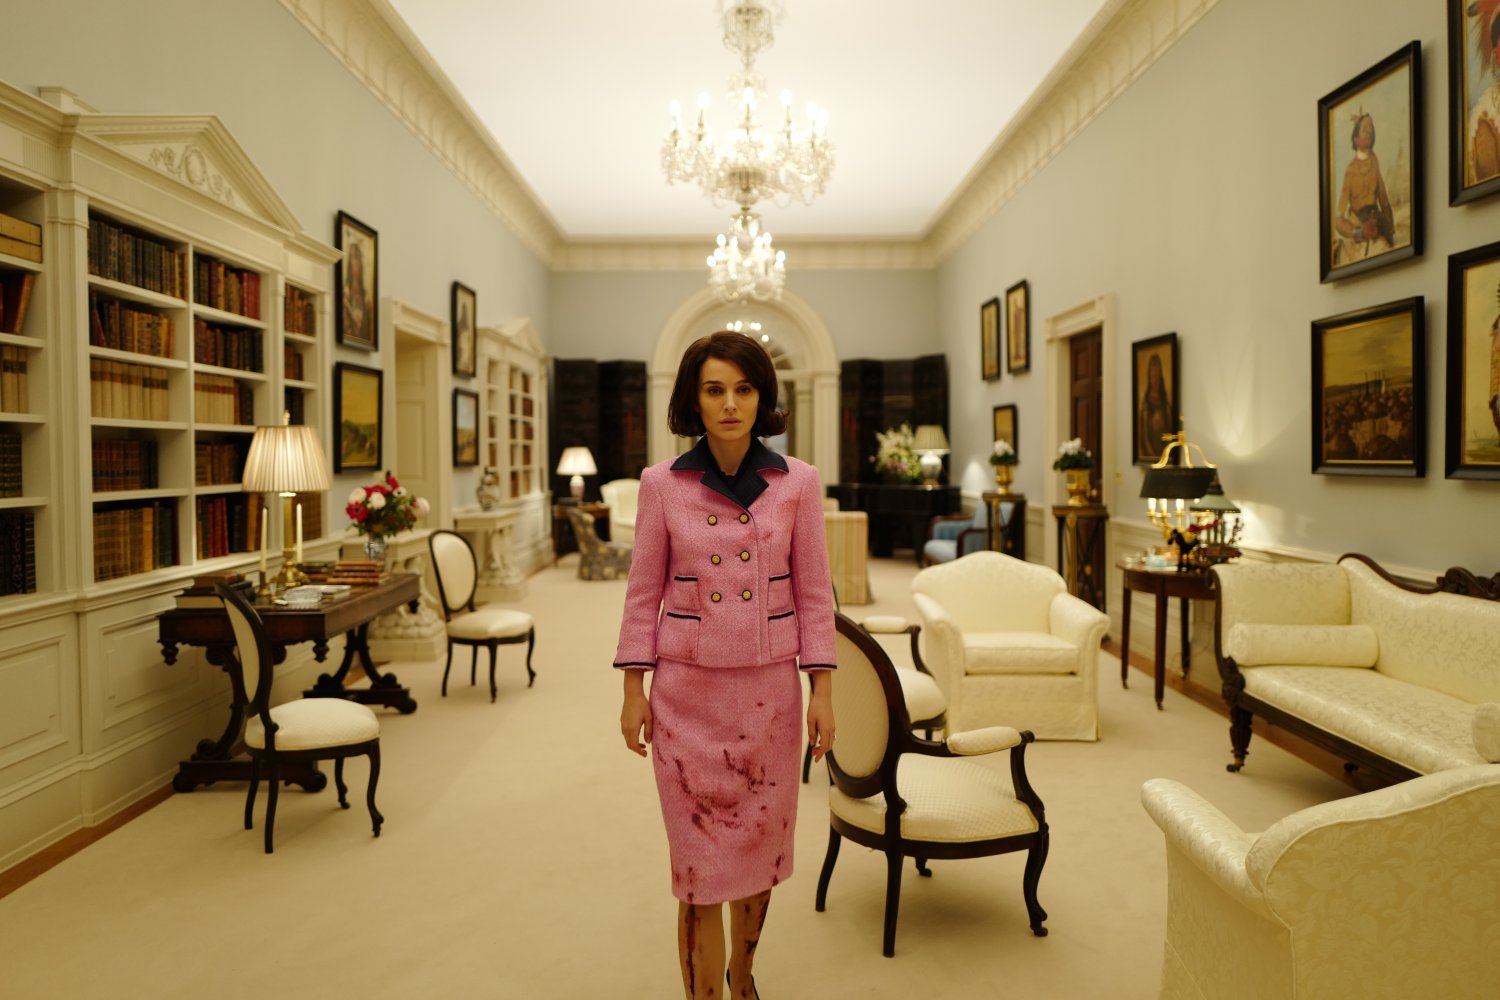 ‘Jackie’ Blu-ray Review: A Polished But Distracting Display of Grief – HD Report